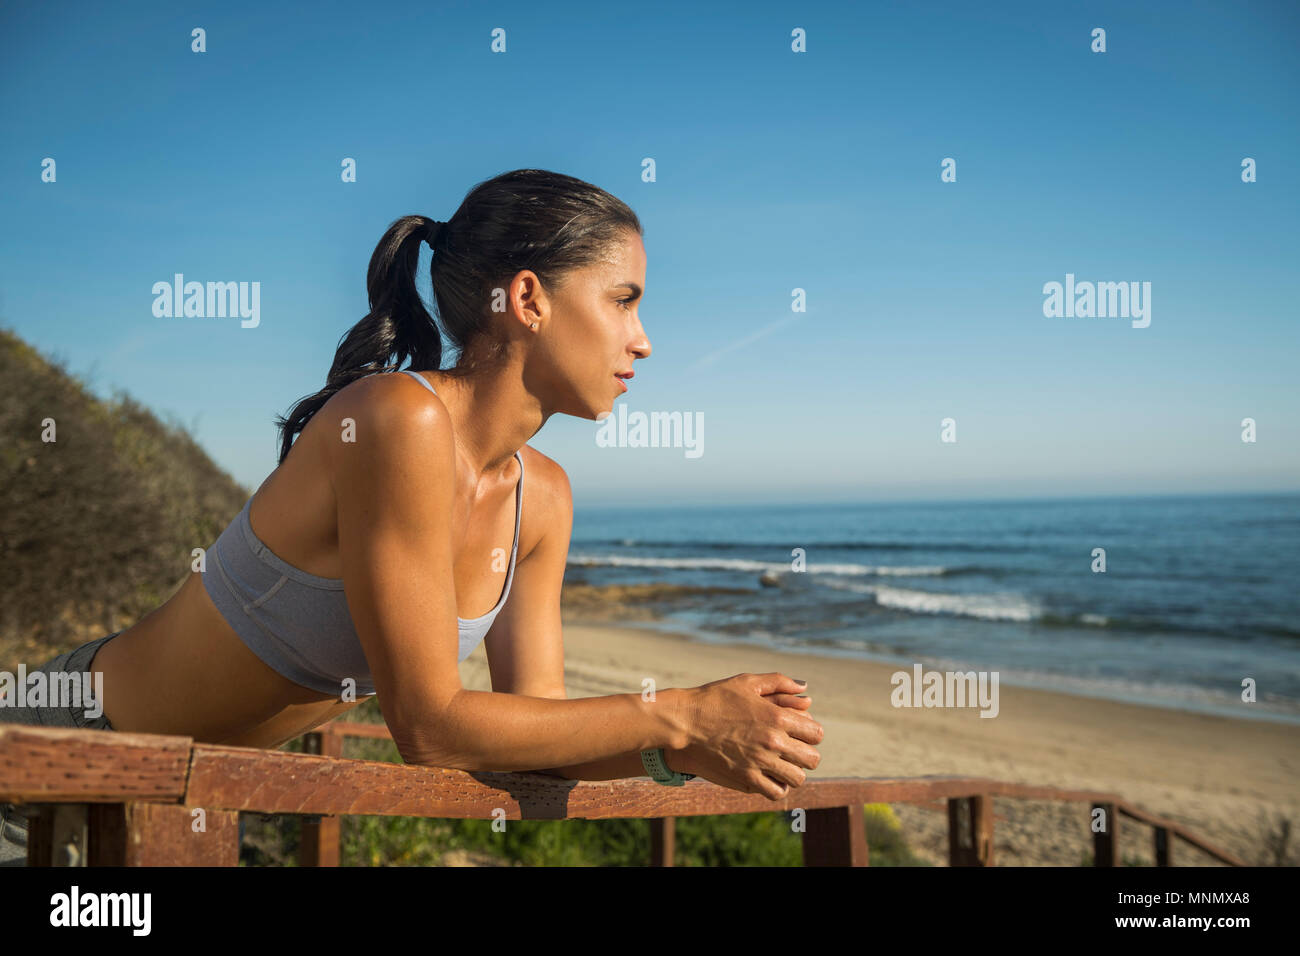 USA, California, Newport Beach, Woman in sport suit looking at sea Stock Photo